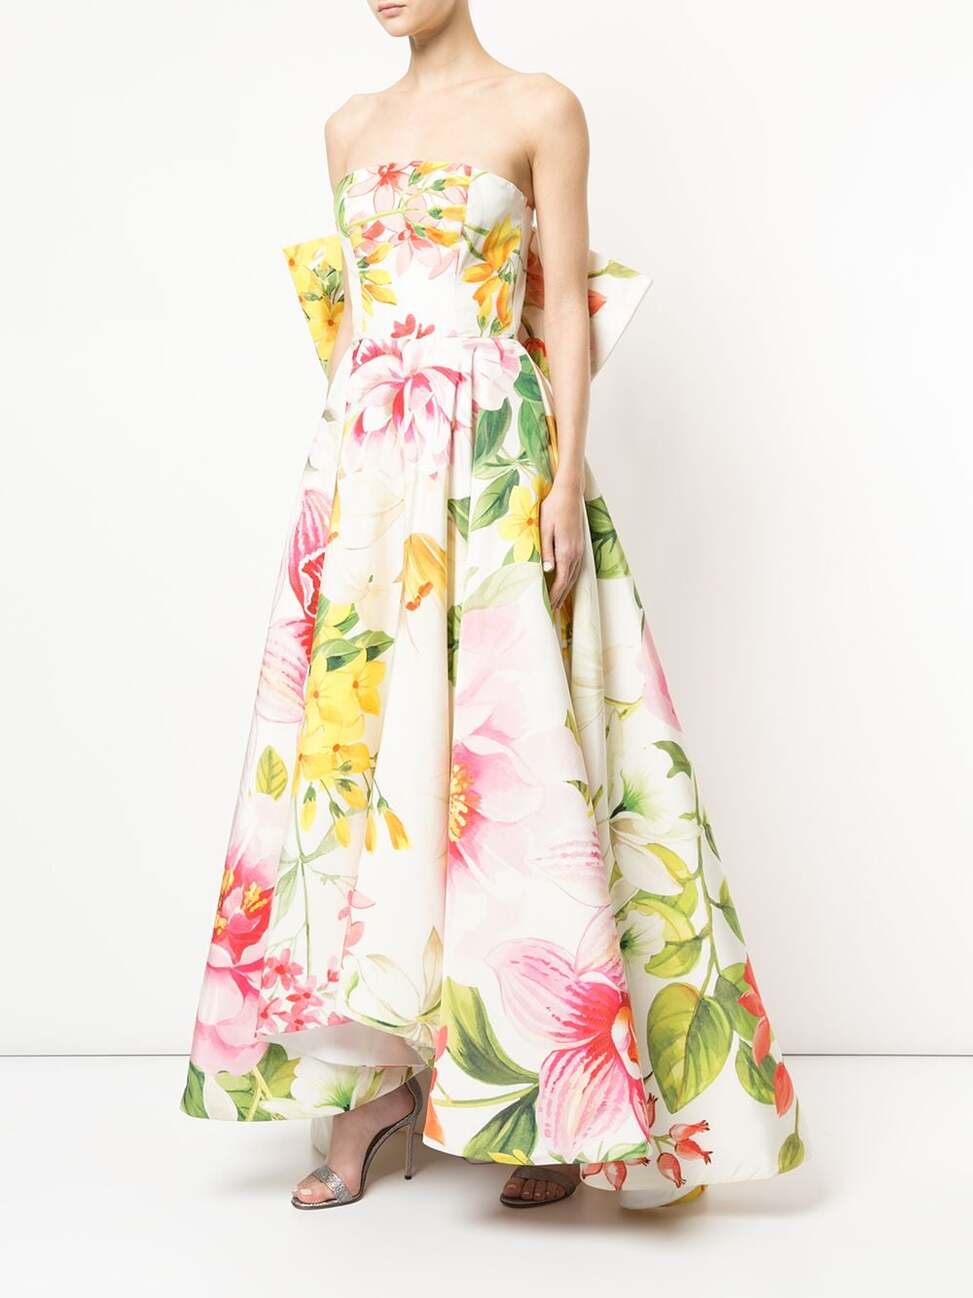 Floral Spring wedding dress with a giant bow